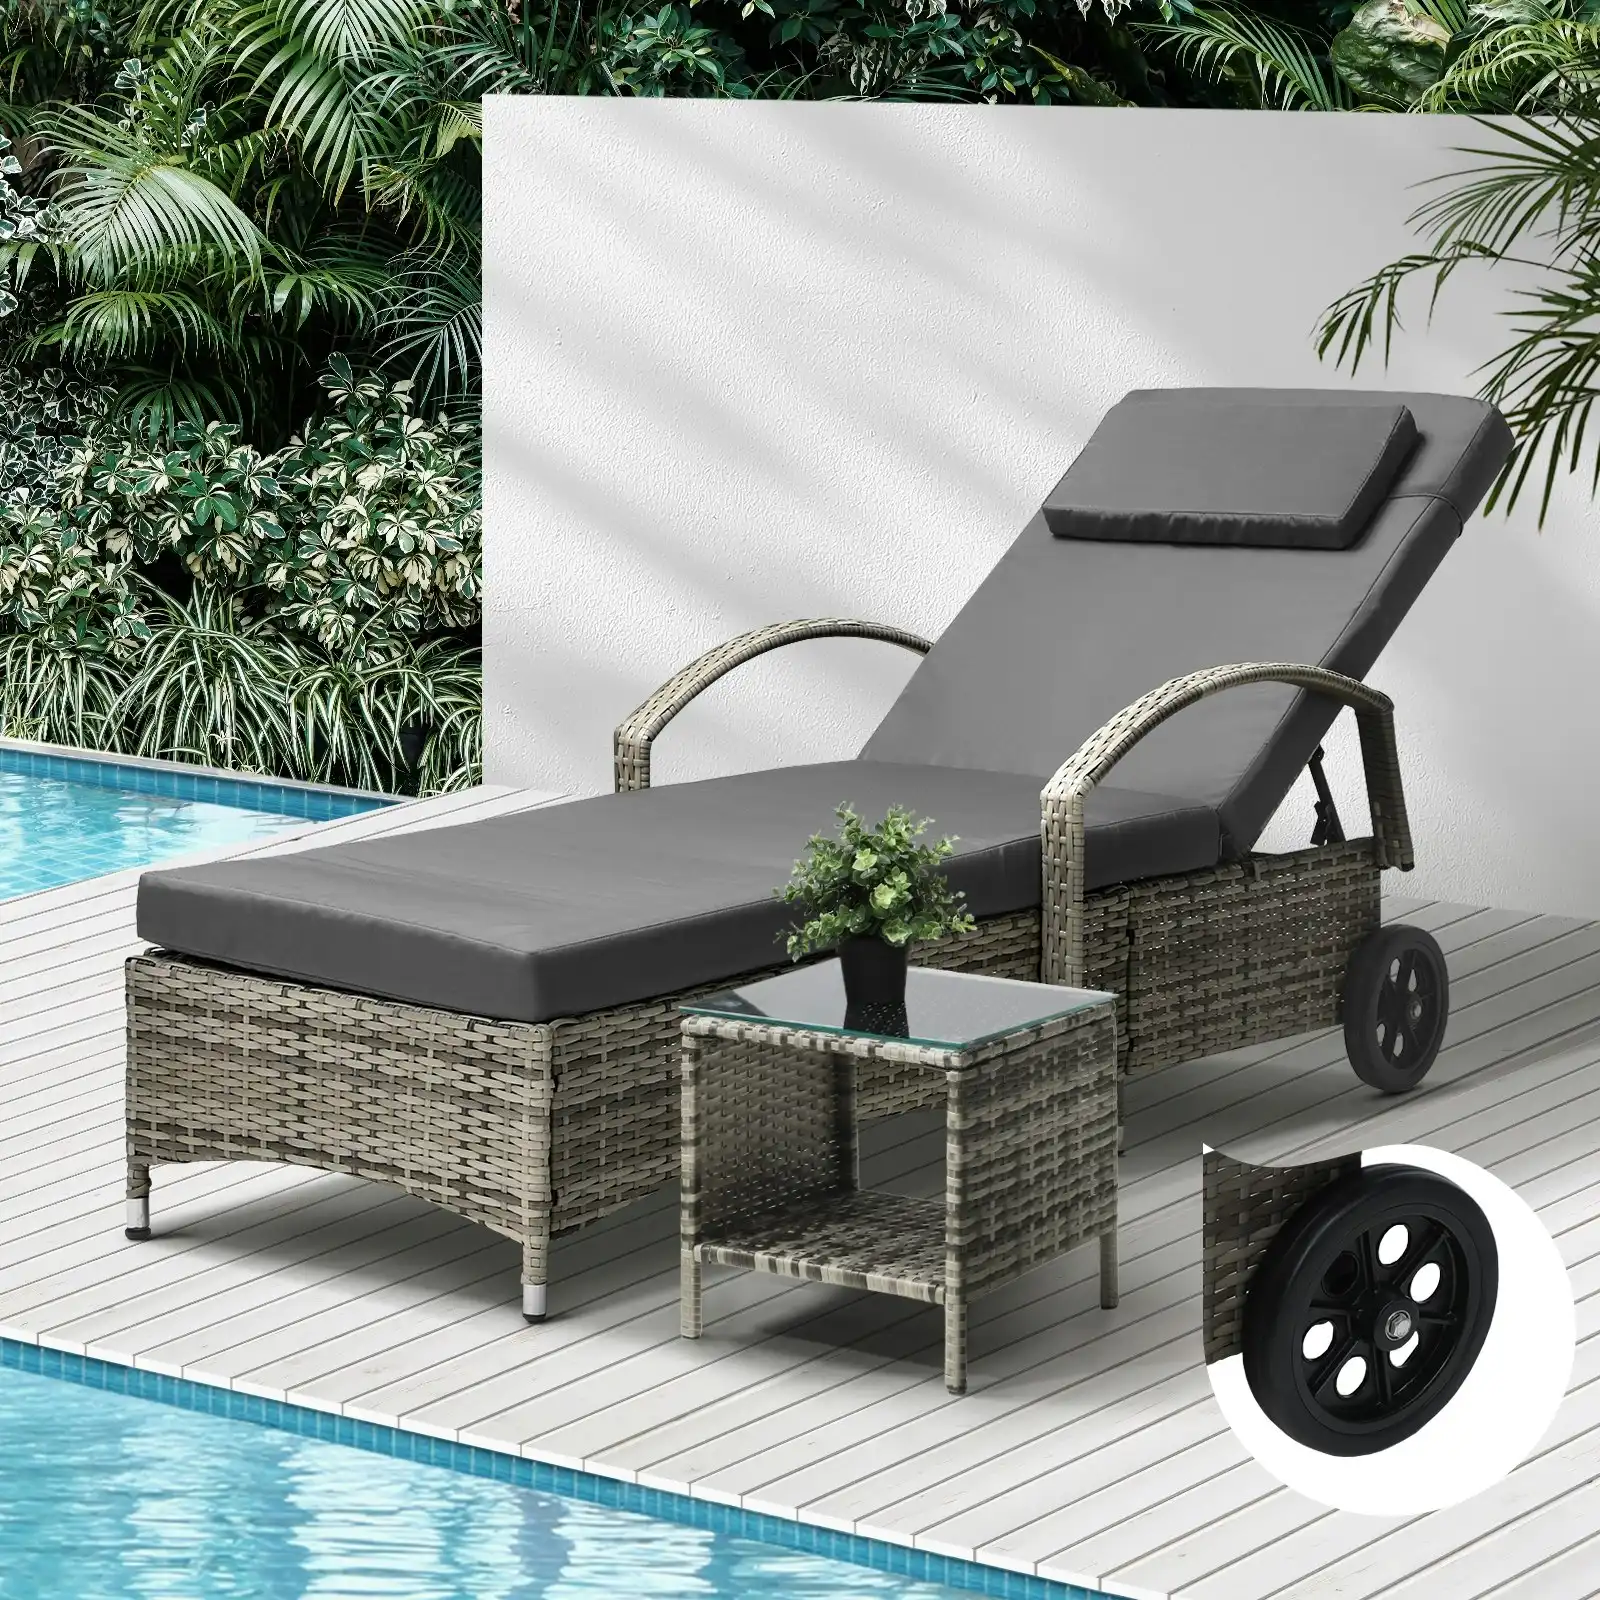 Livsip Sun Lounger Wheeled Day Bed with Table Patio Outdoor Setting Furniture